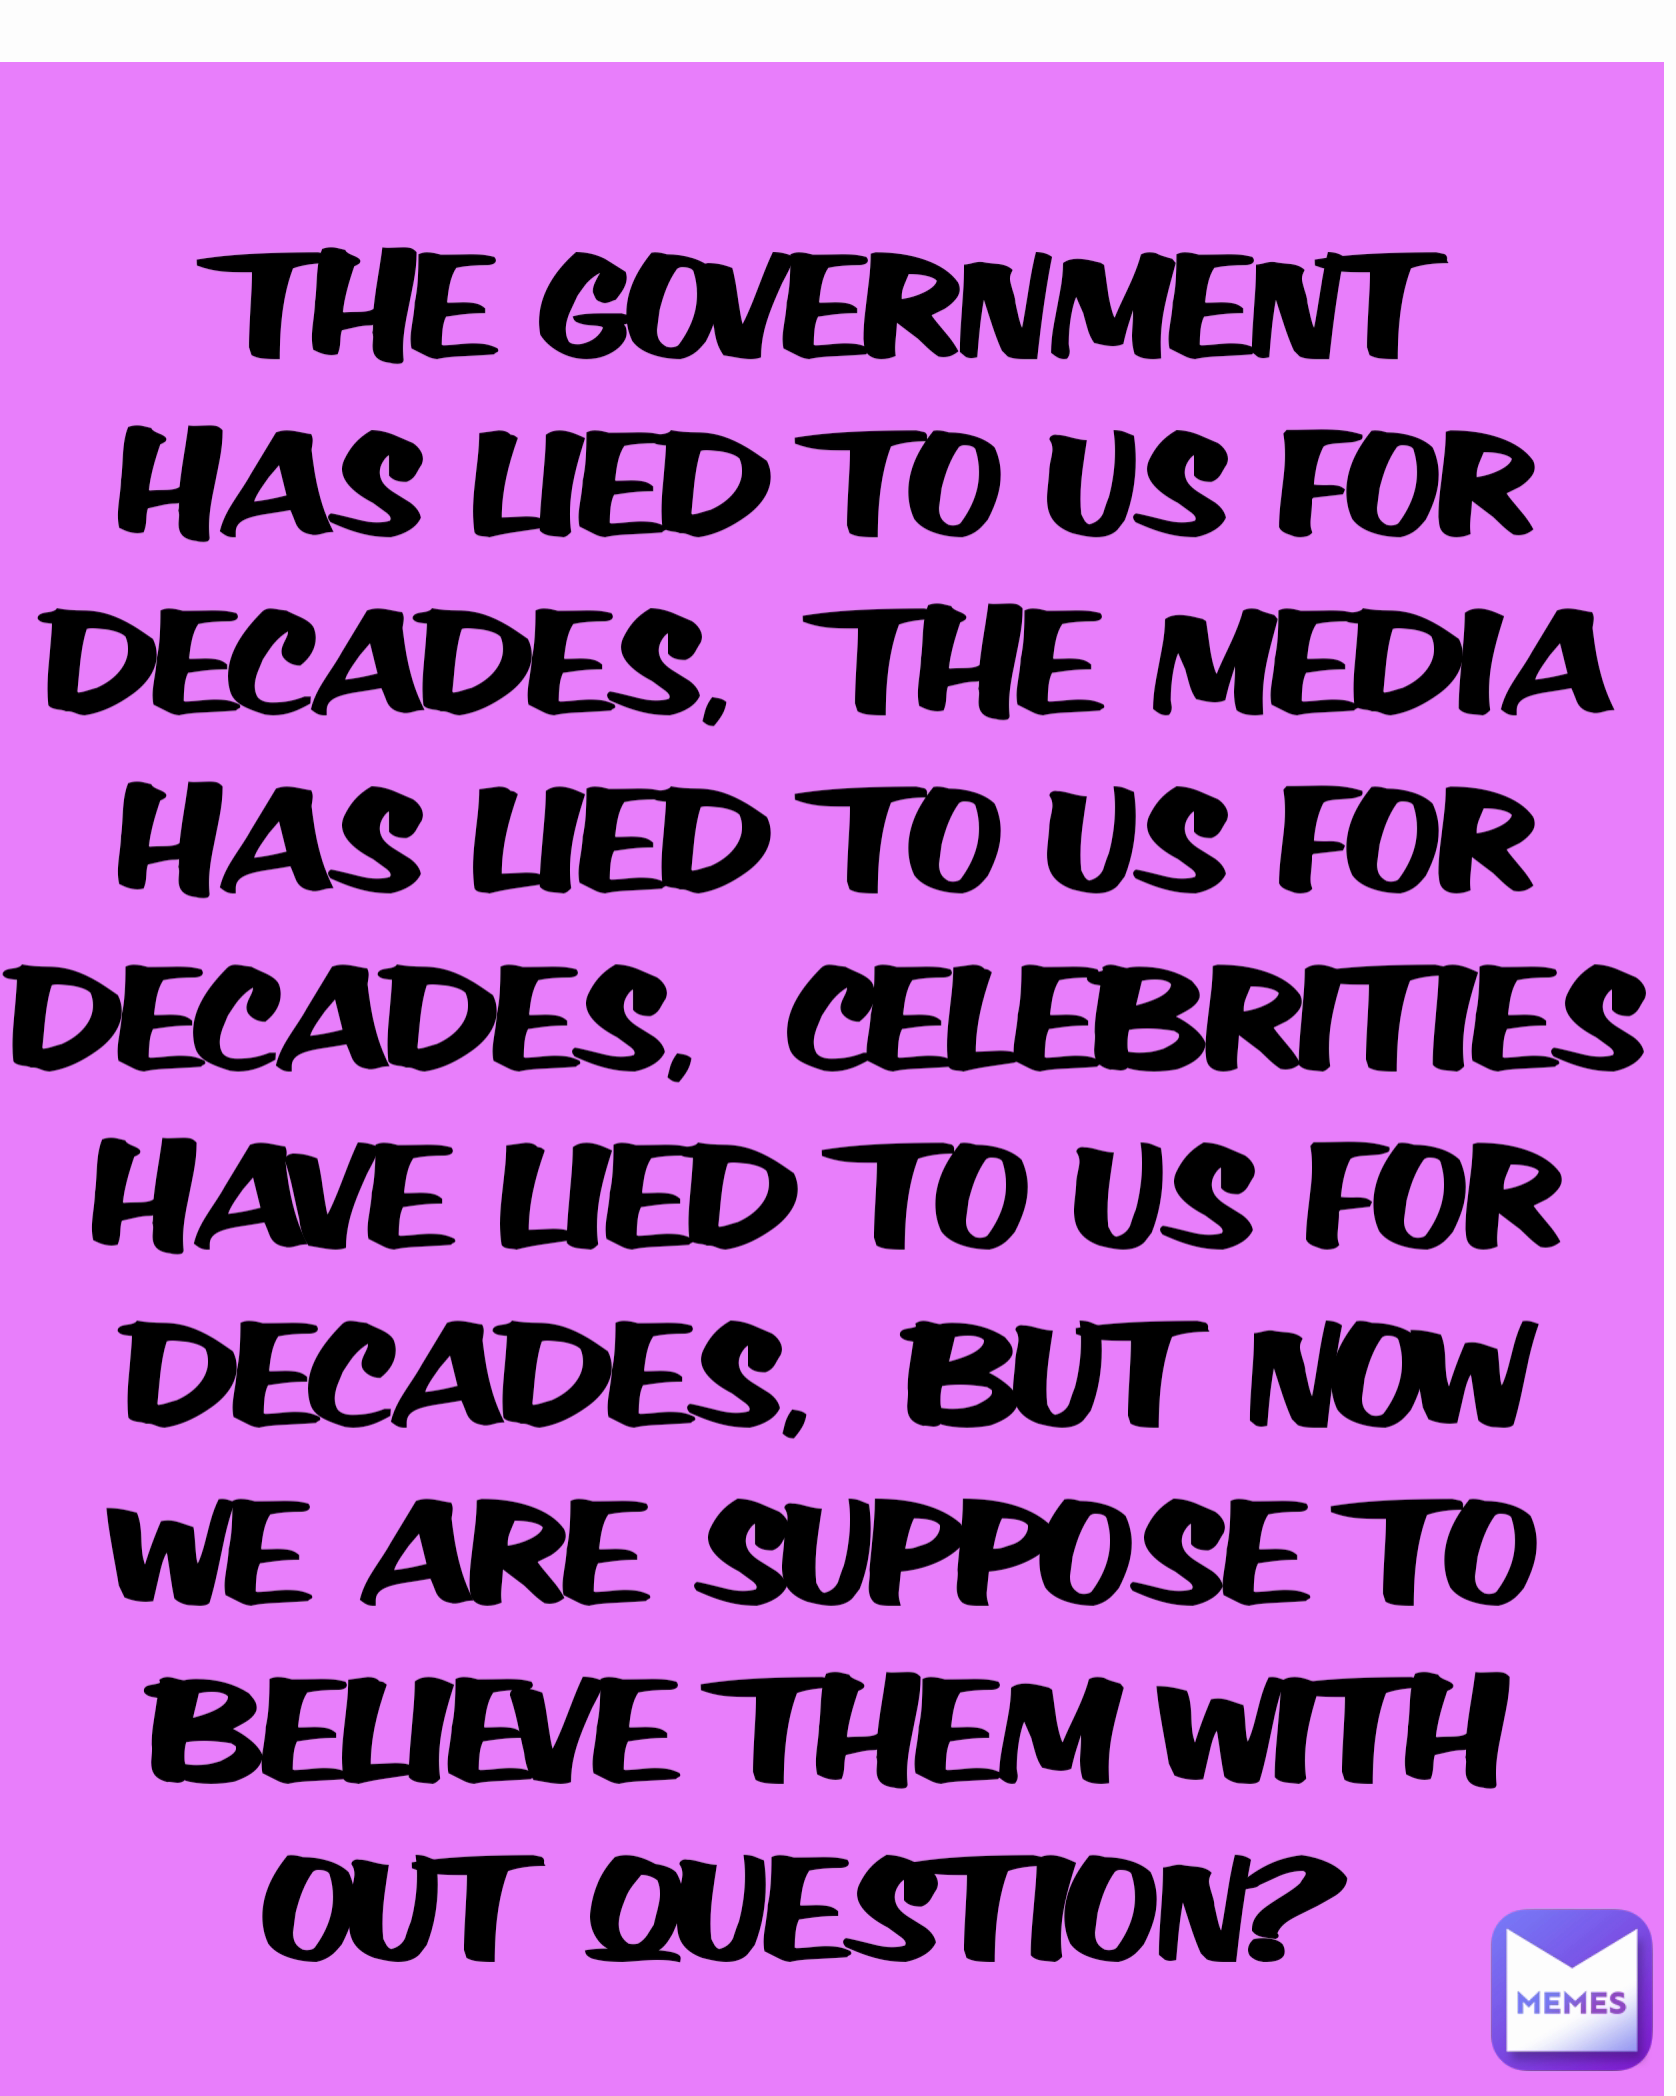 THE GOVERNMENT HAS LIED TO US FOR DECADES,  THE MEDIA HAS LIED TO US FOR DECADES,  CELEBRITIES HAVE LIED TO US FOR DECADES,  BUT NOW WE ARE SUPPOSE TO BELIEVE THEM WITH OUT QUESTION? 